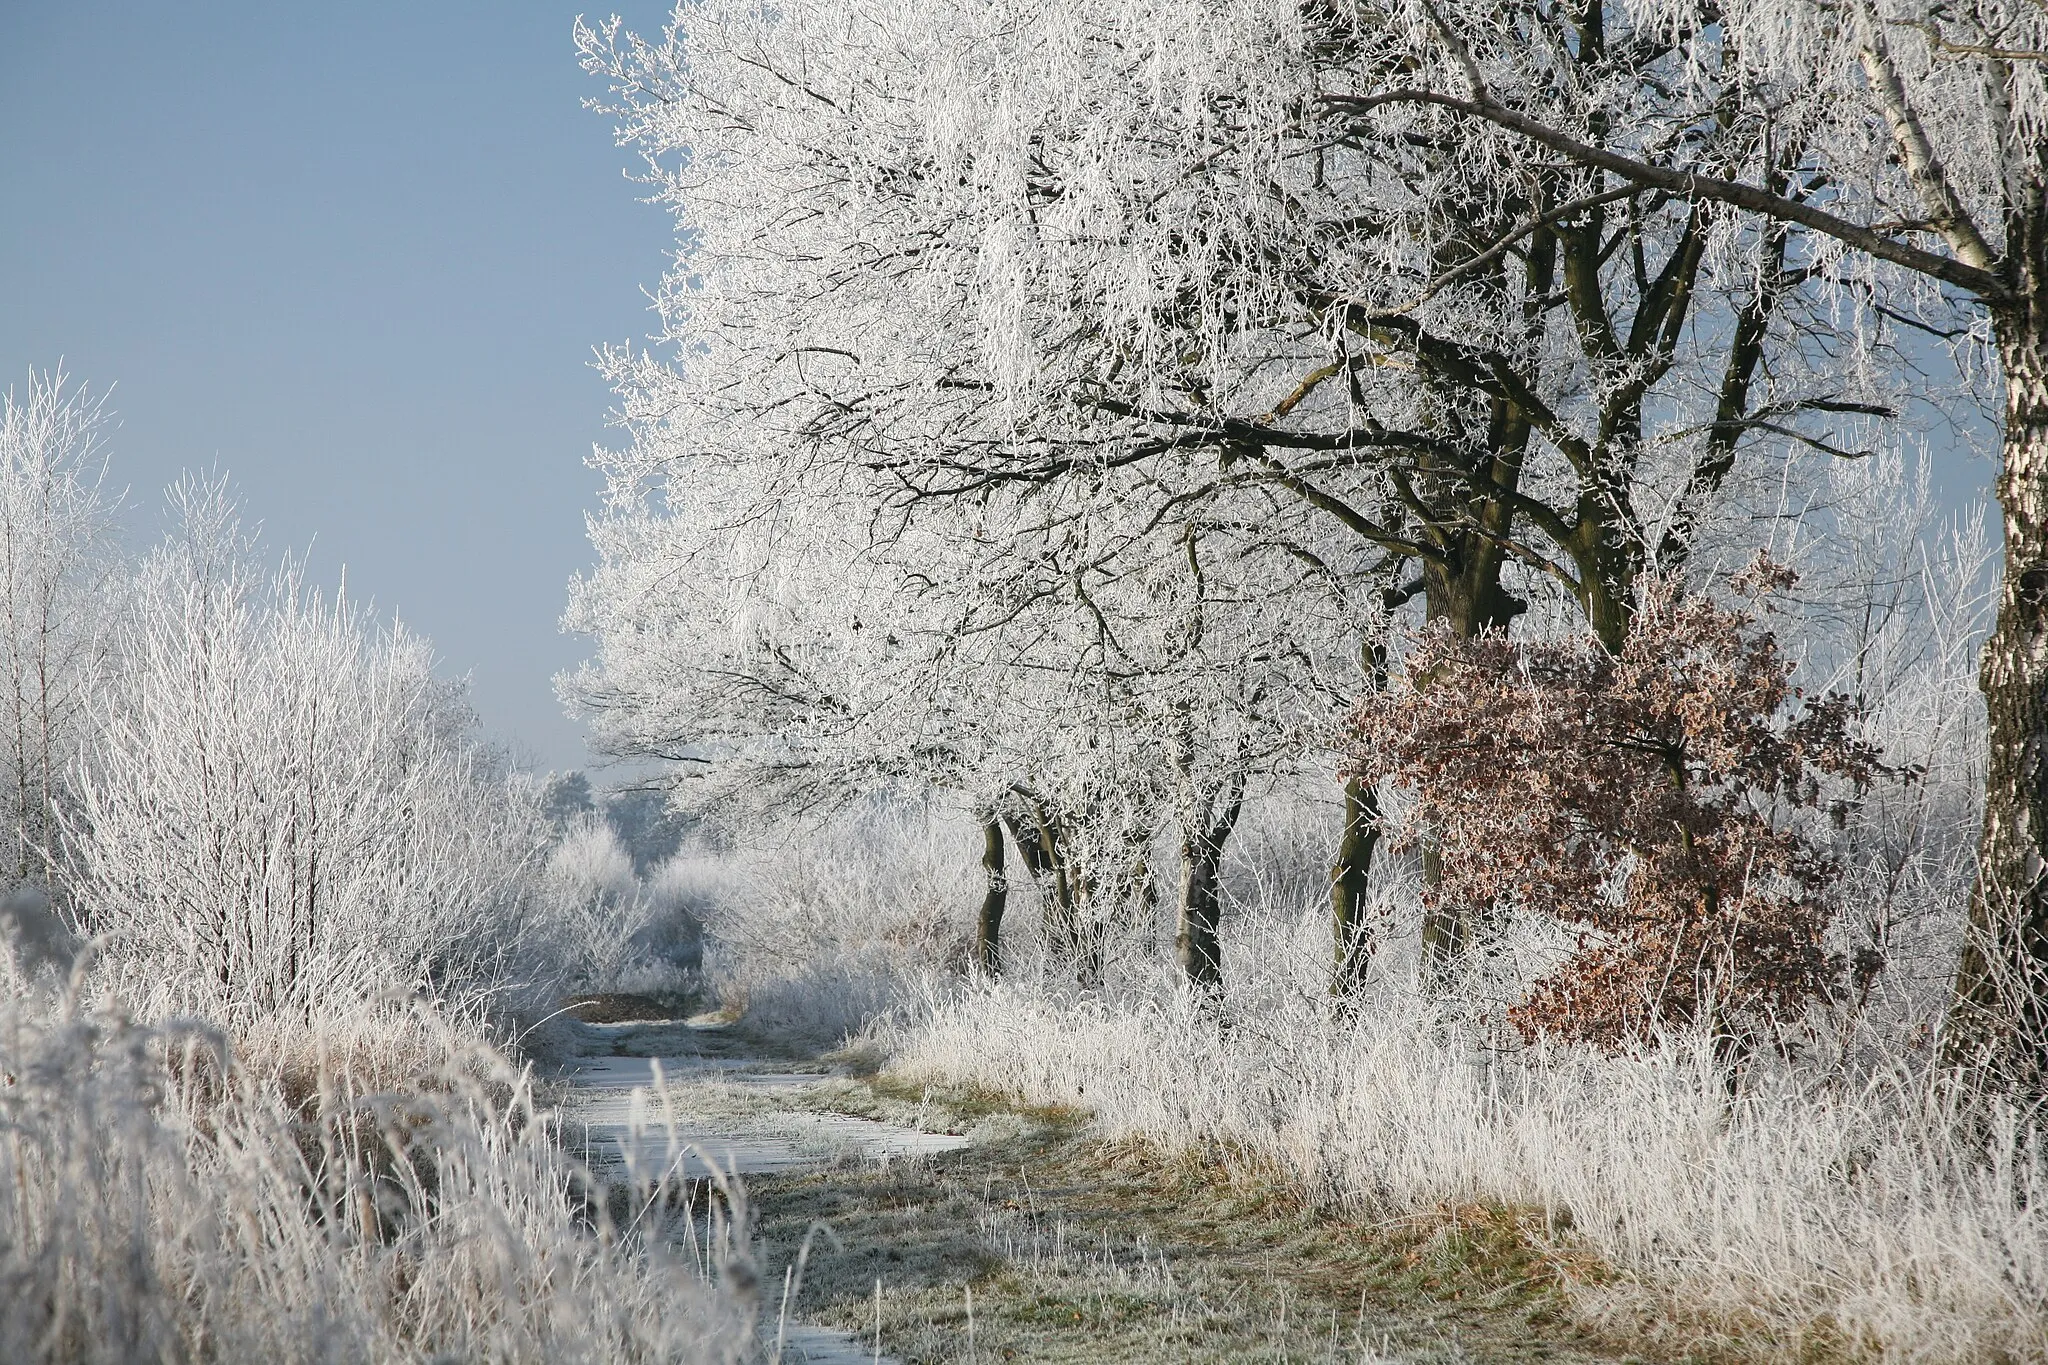 Photo showing: Hoar frost or soft rime on a cold winter day in Lower Saxony, Germany.